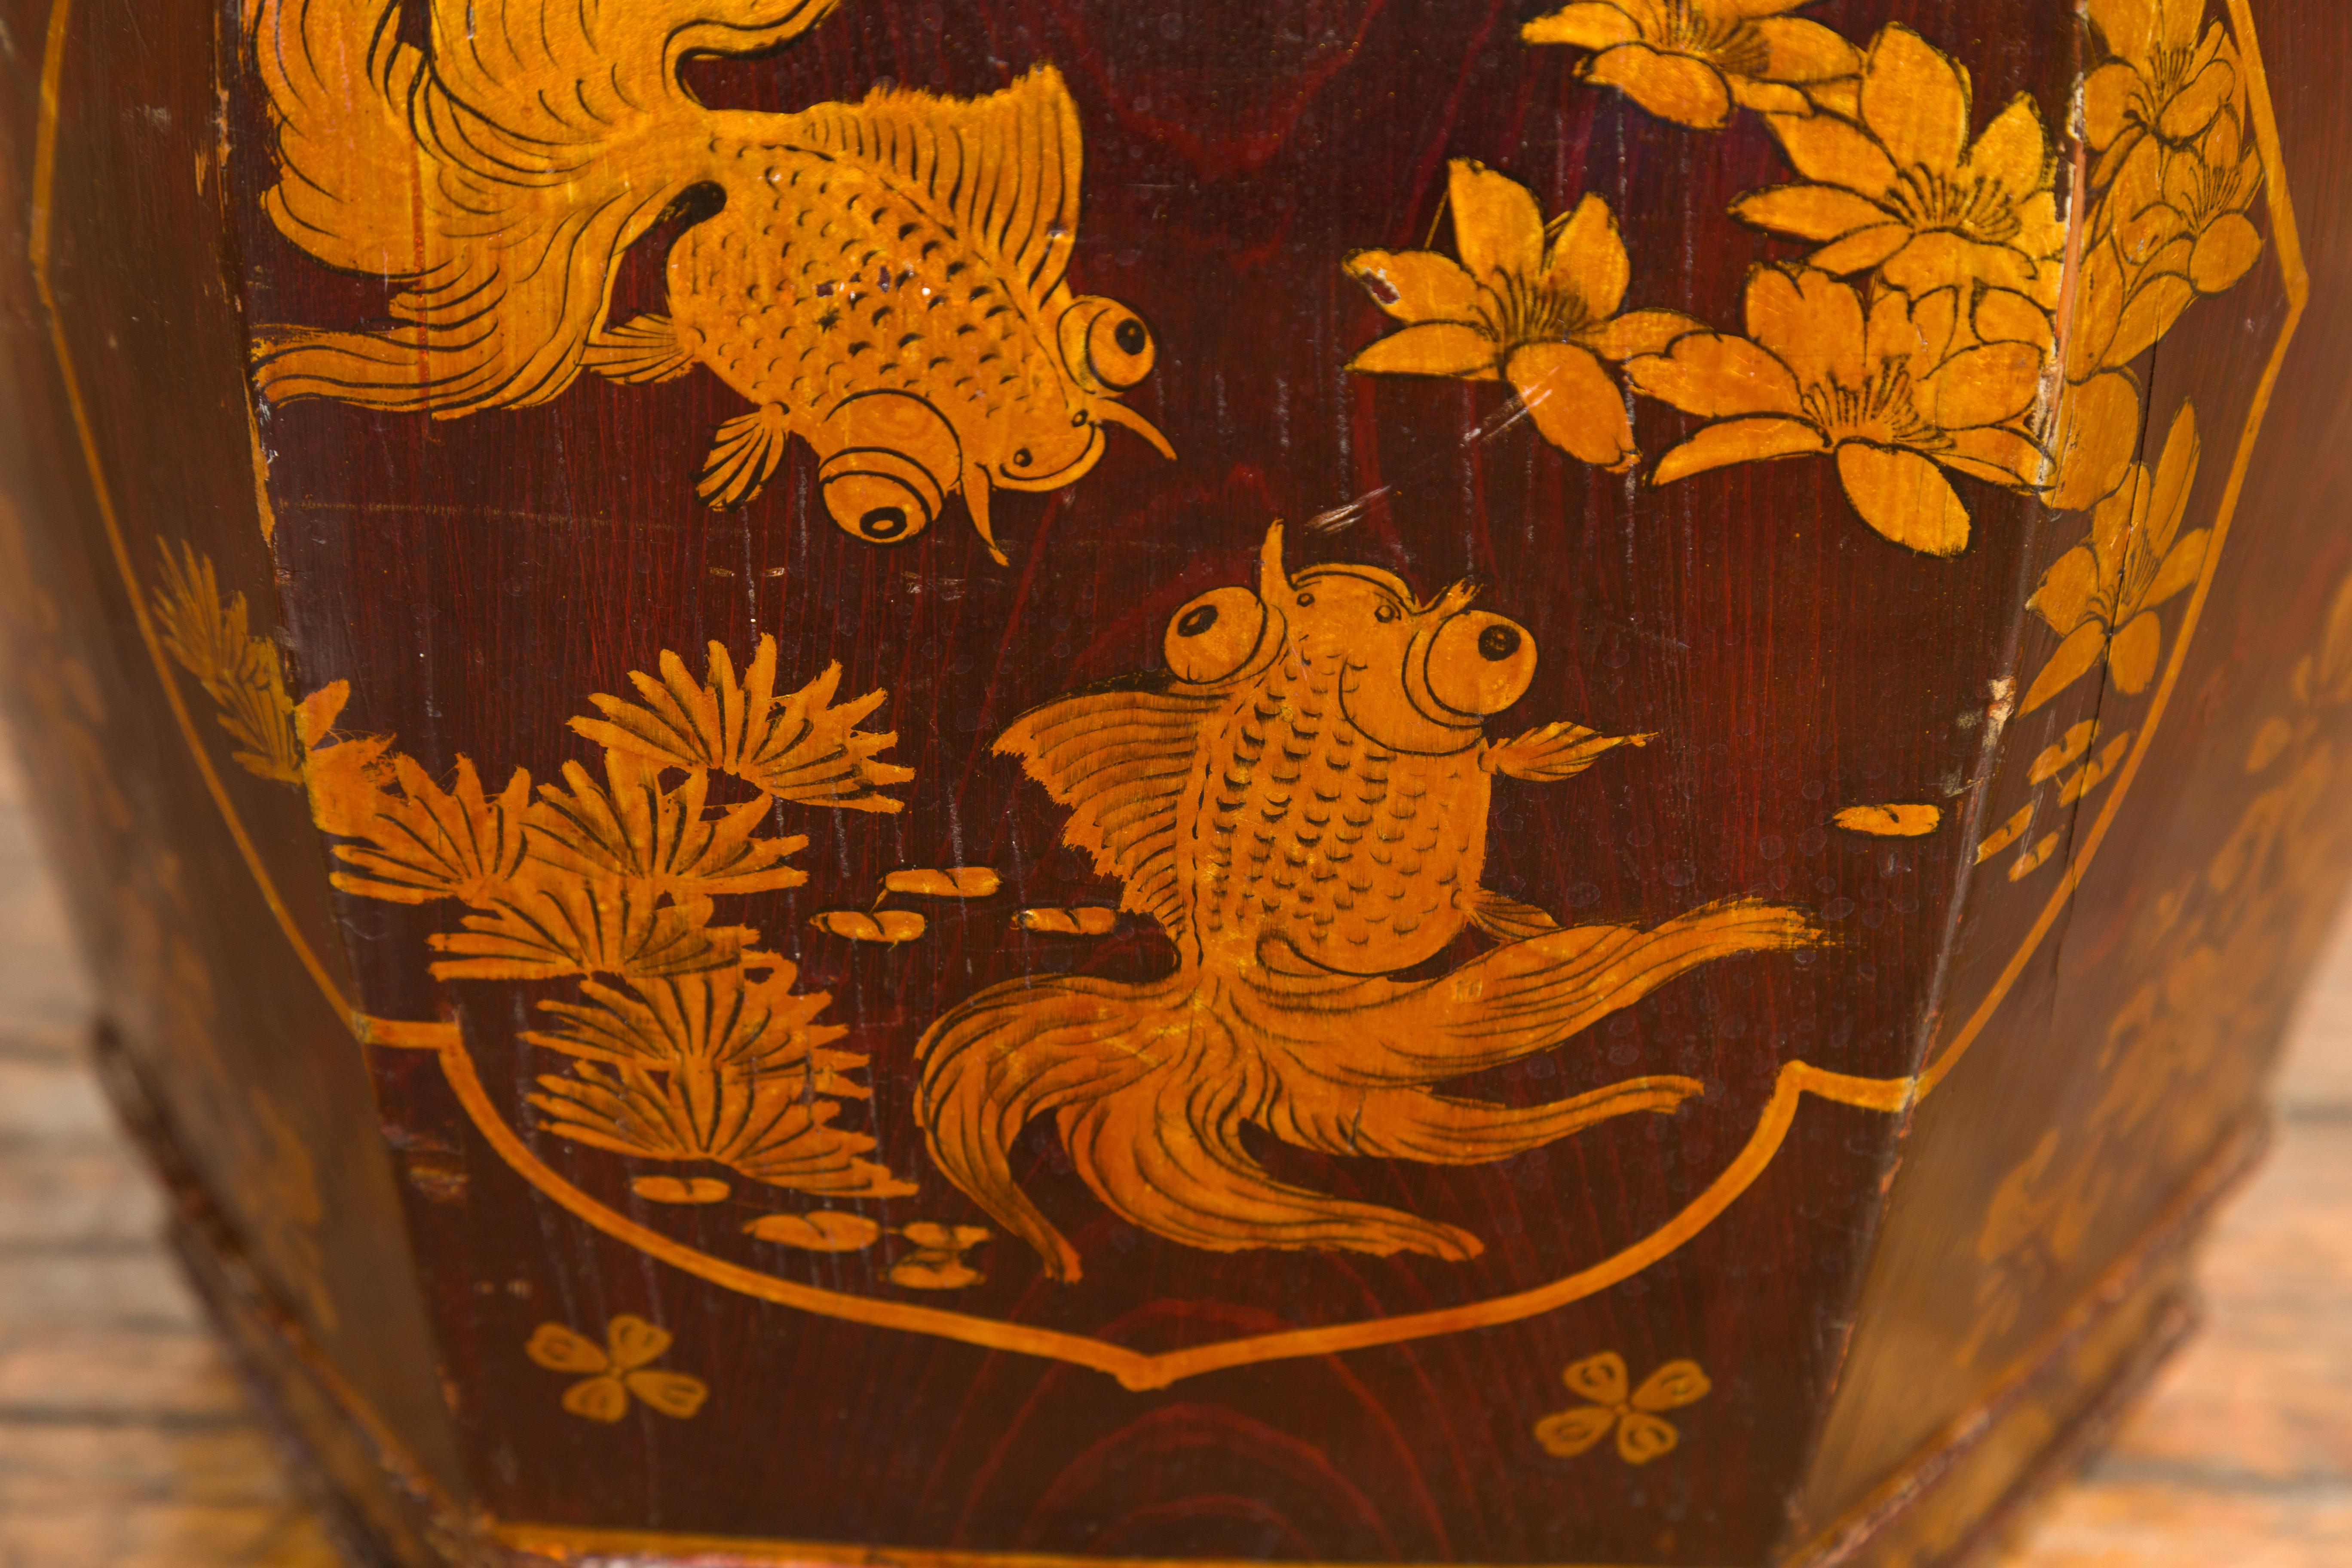 Antique Chinese Wooden Rice Barrel with Fish, Flowers, Deer and Birds Motifs For Sale 9